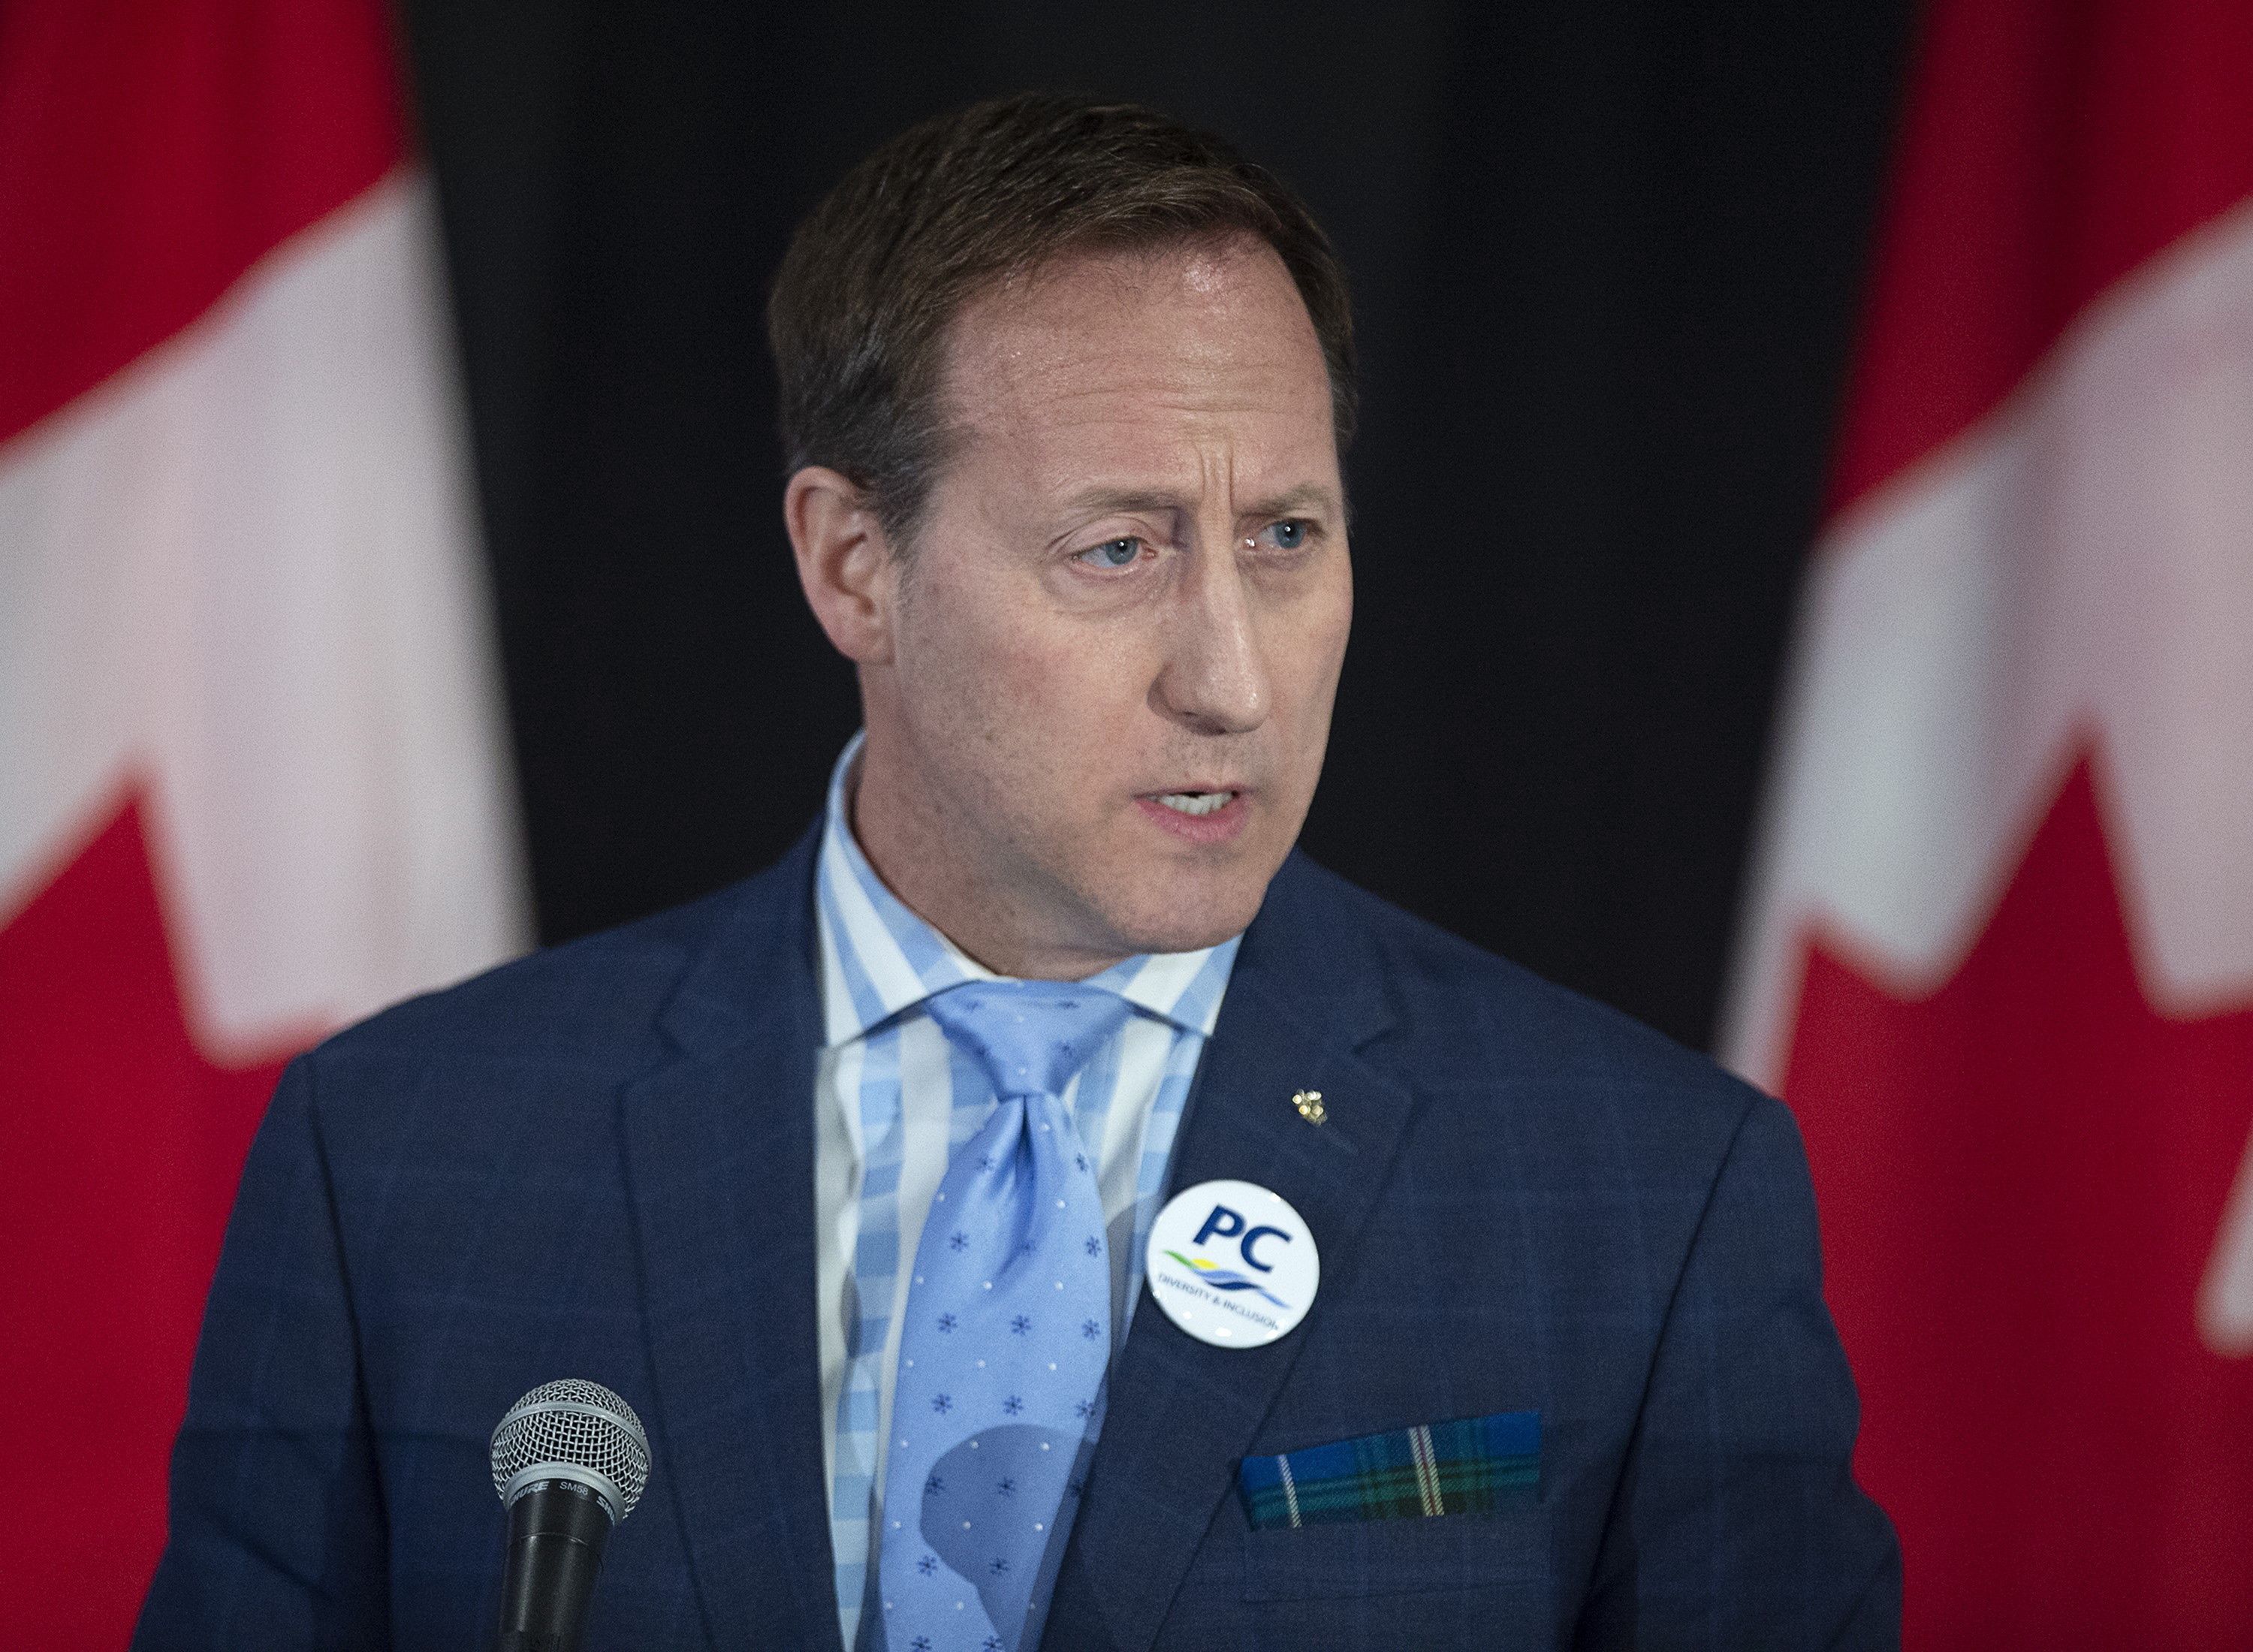 MacKay addresses the crowd at a federal Conservative leadership forum during the annual general meeting of the Nova Scotia Progressive Conservative party in Halifax on Feb. 8, 2020 (CP/Andrew Vaughan)